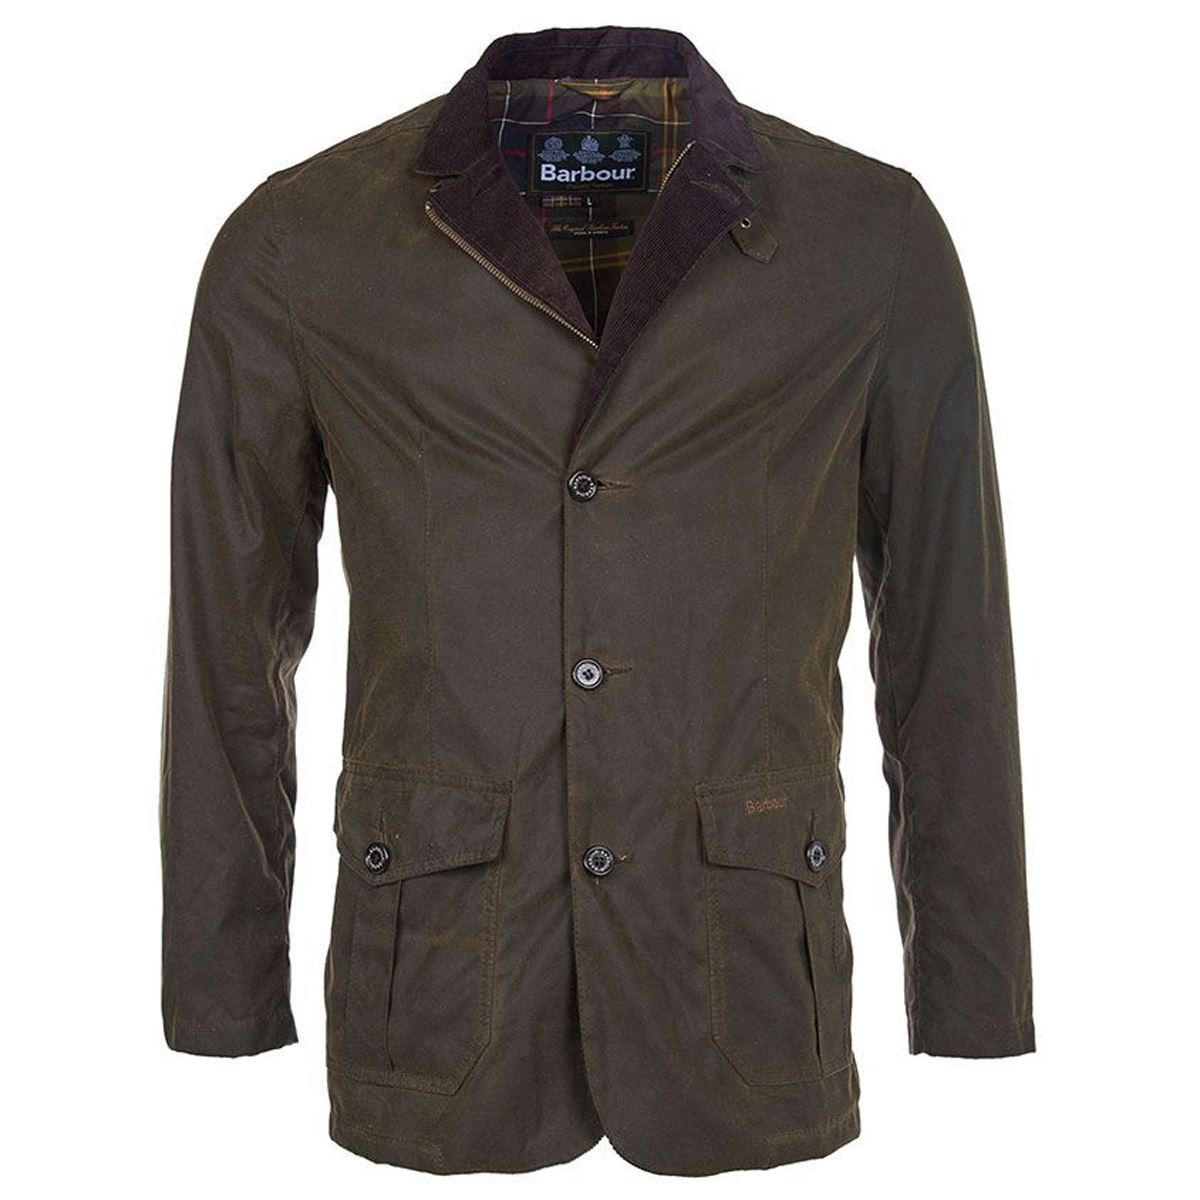 What is a Barbour jacket mainly used or designed for?